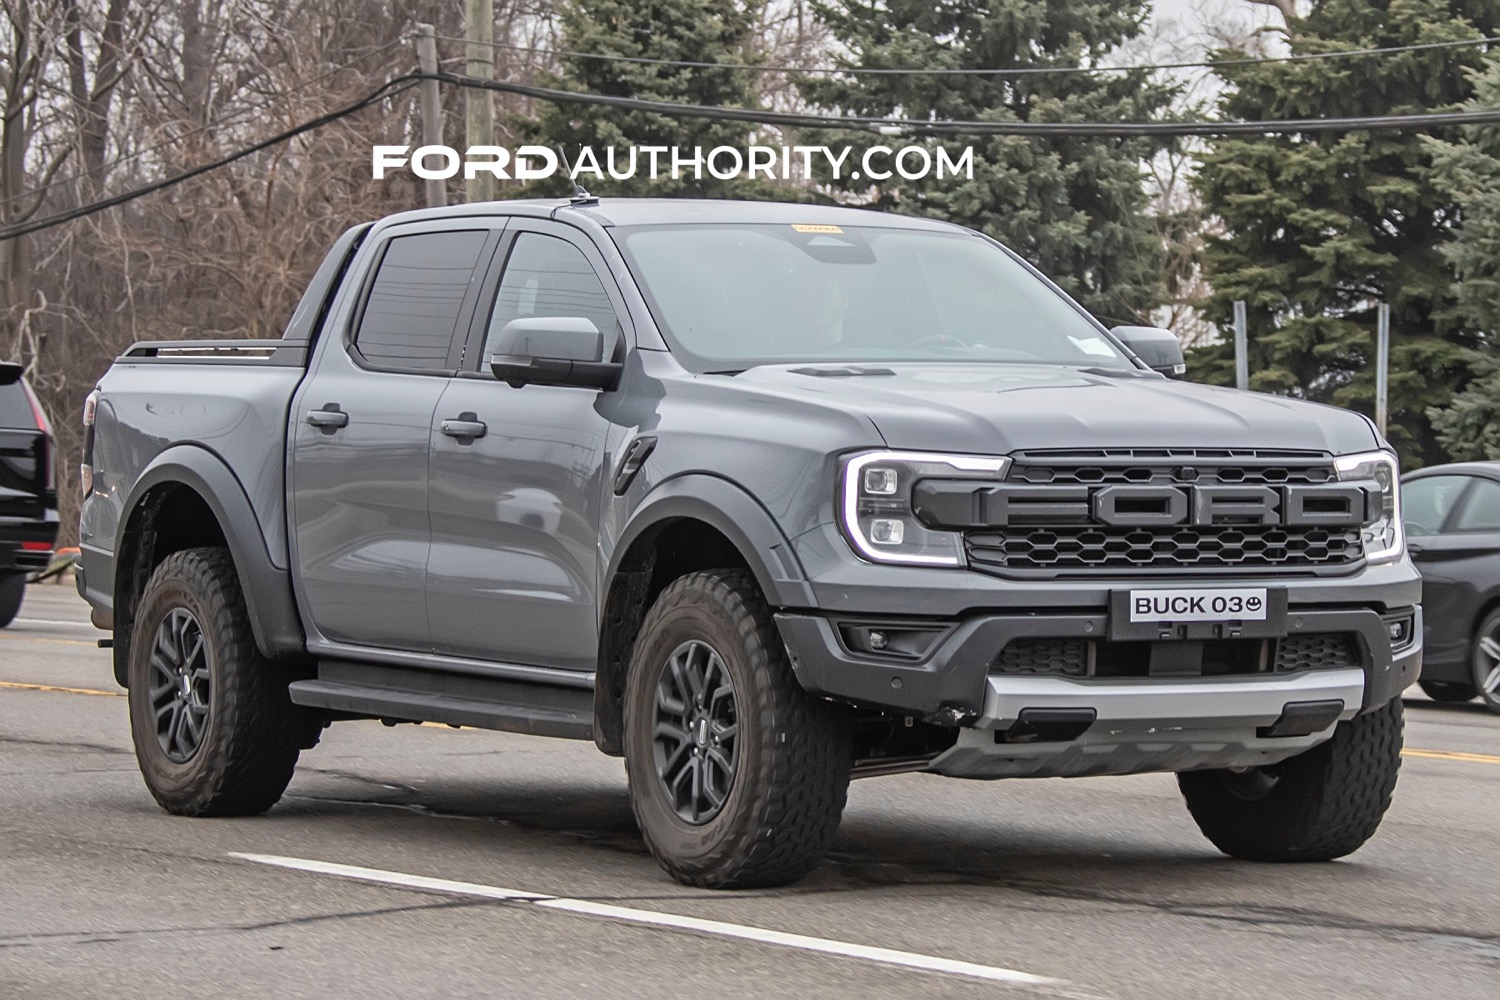 Ford Ranger Raptor News and Reviews